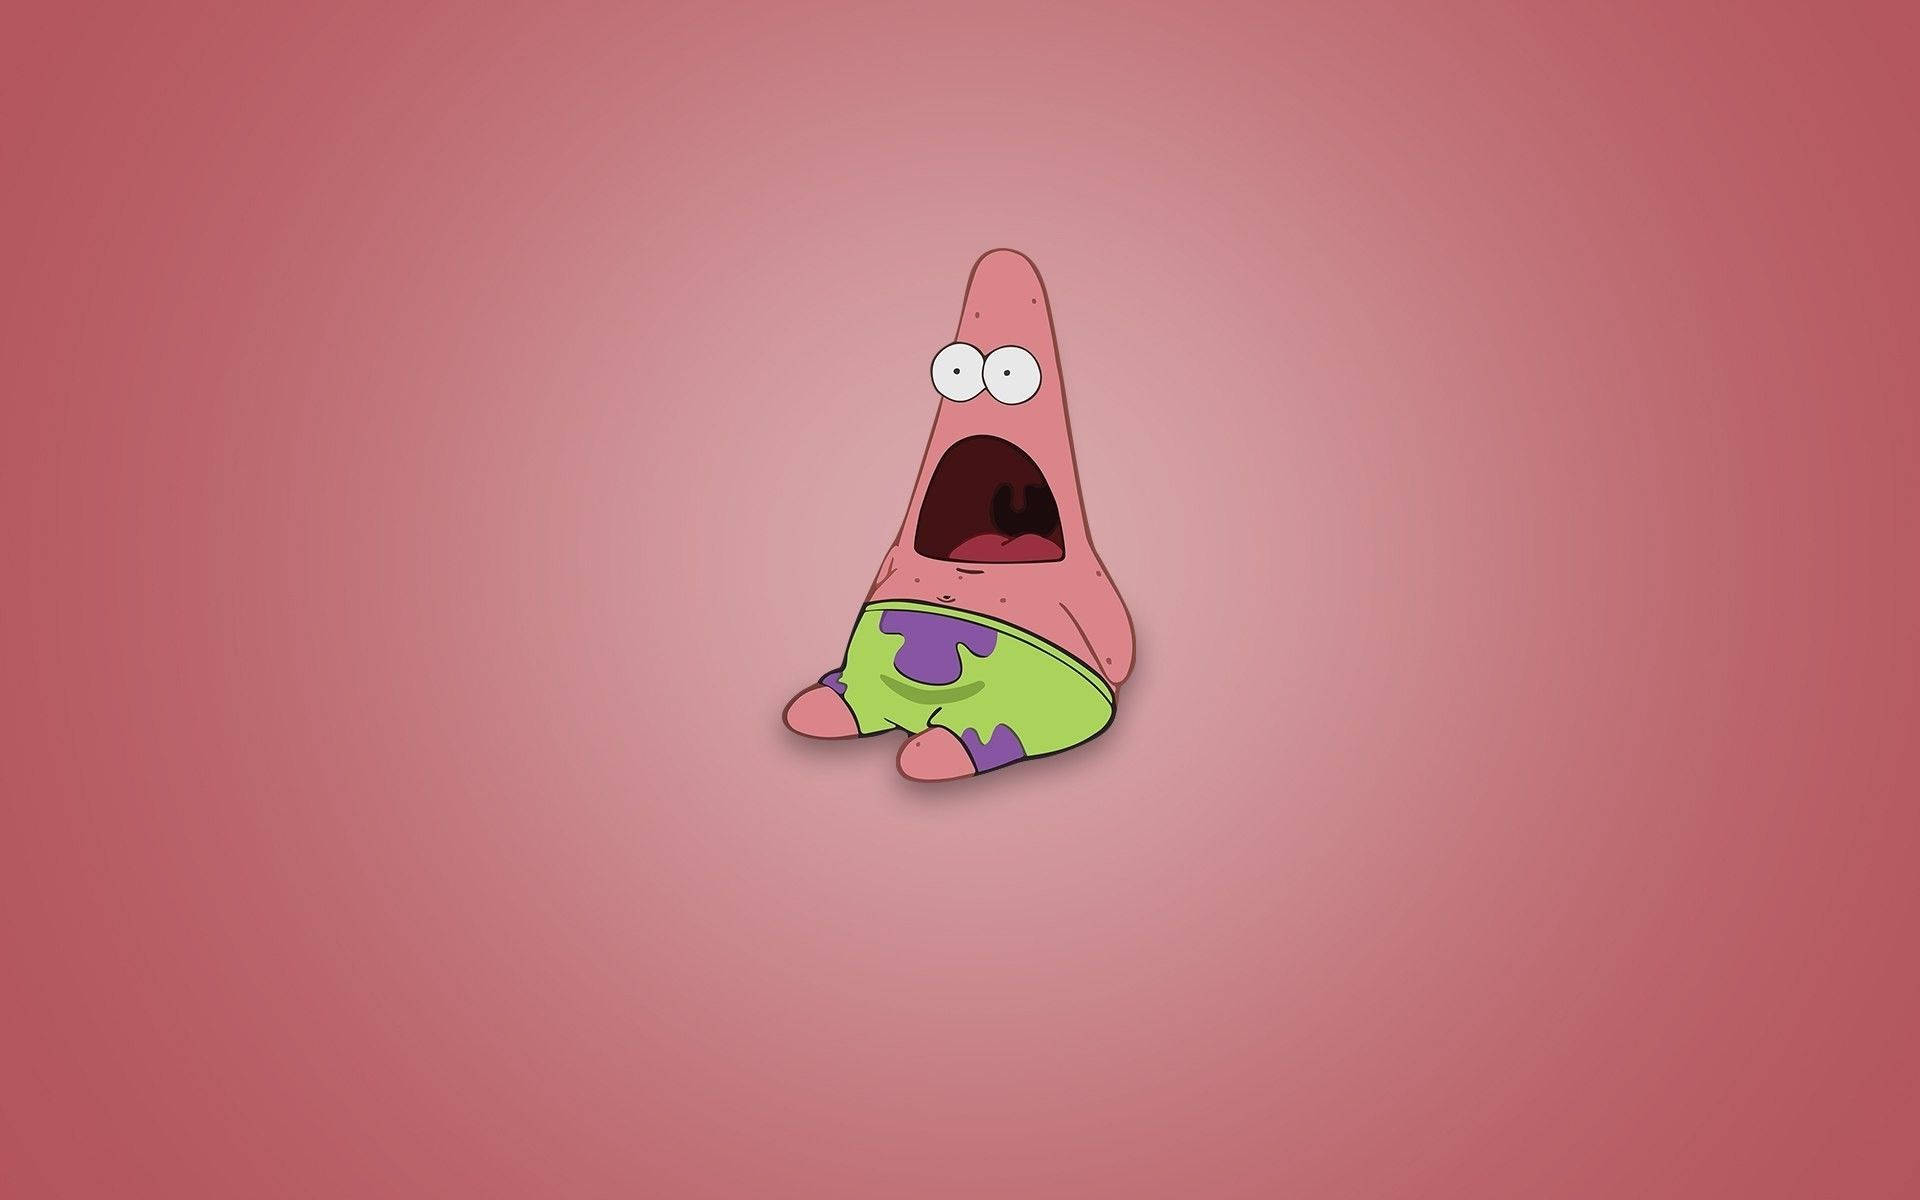 Patrick making a funny face to bring a smile to your day! Wallpaper